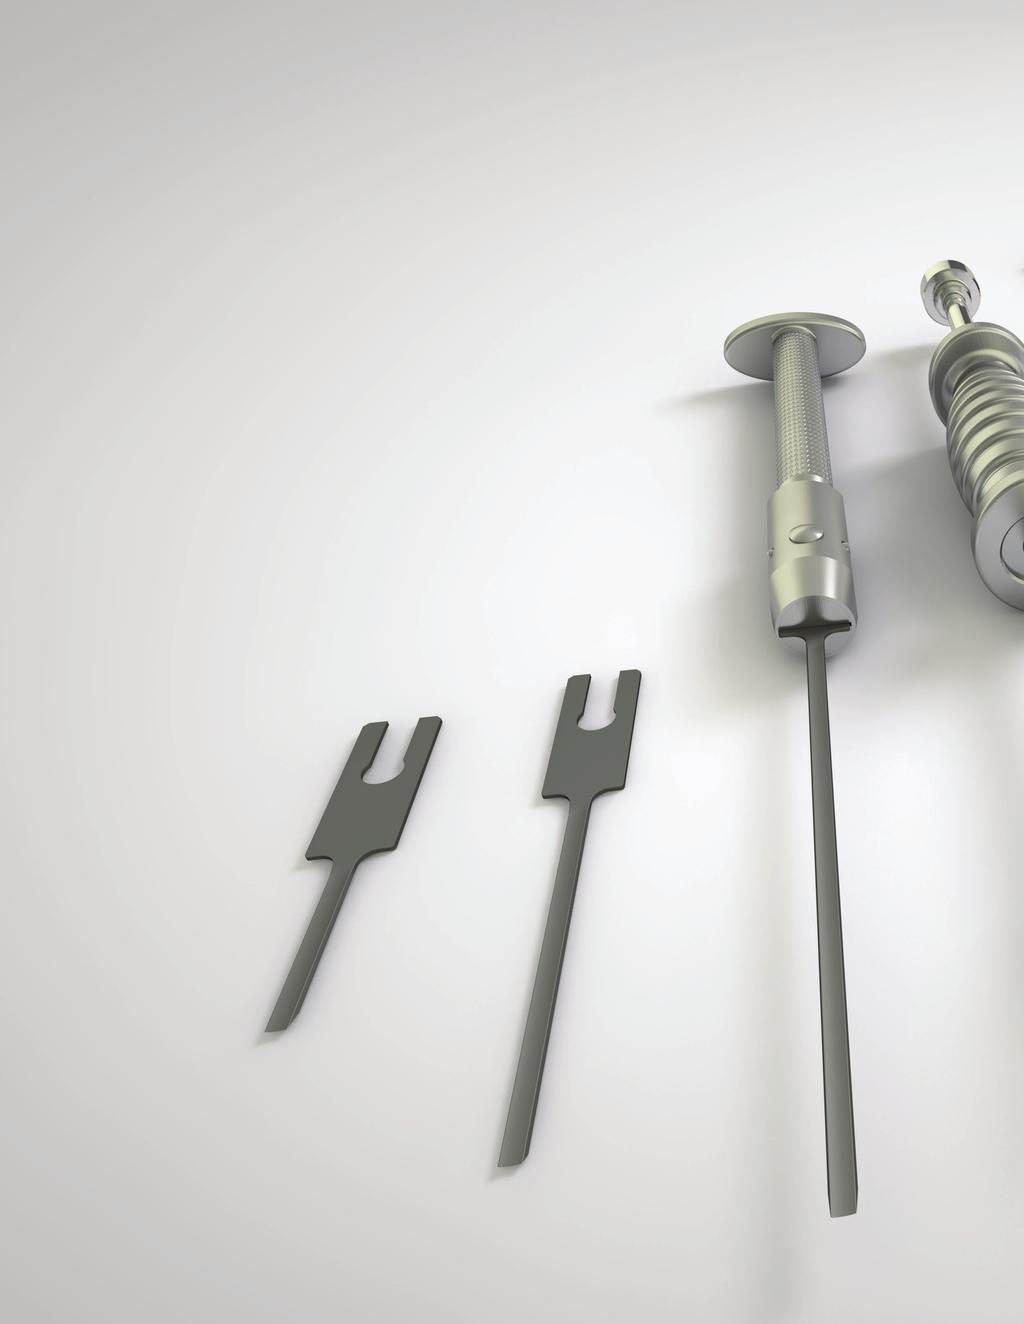 Introducing the orthopaedic industry s first dedicated Shoulder Extraction Instrument set.